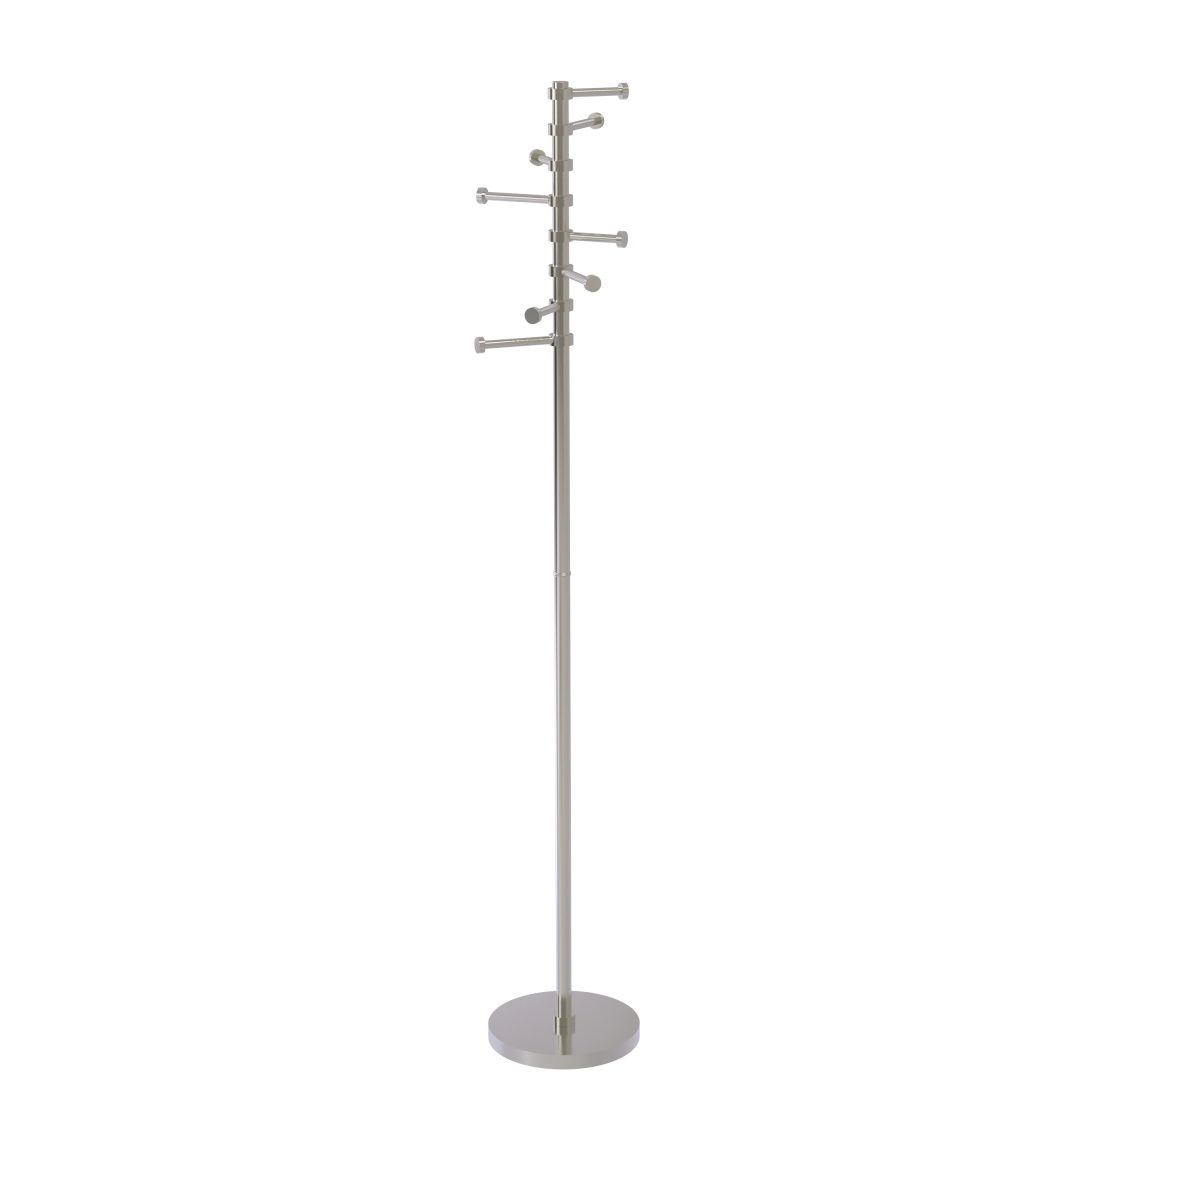 Picture of Allied Brass CS-1-SN Free Standing Coat Rack with Six Pivoting Pegs, Satin Nickel